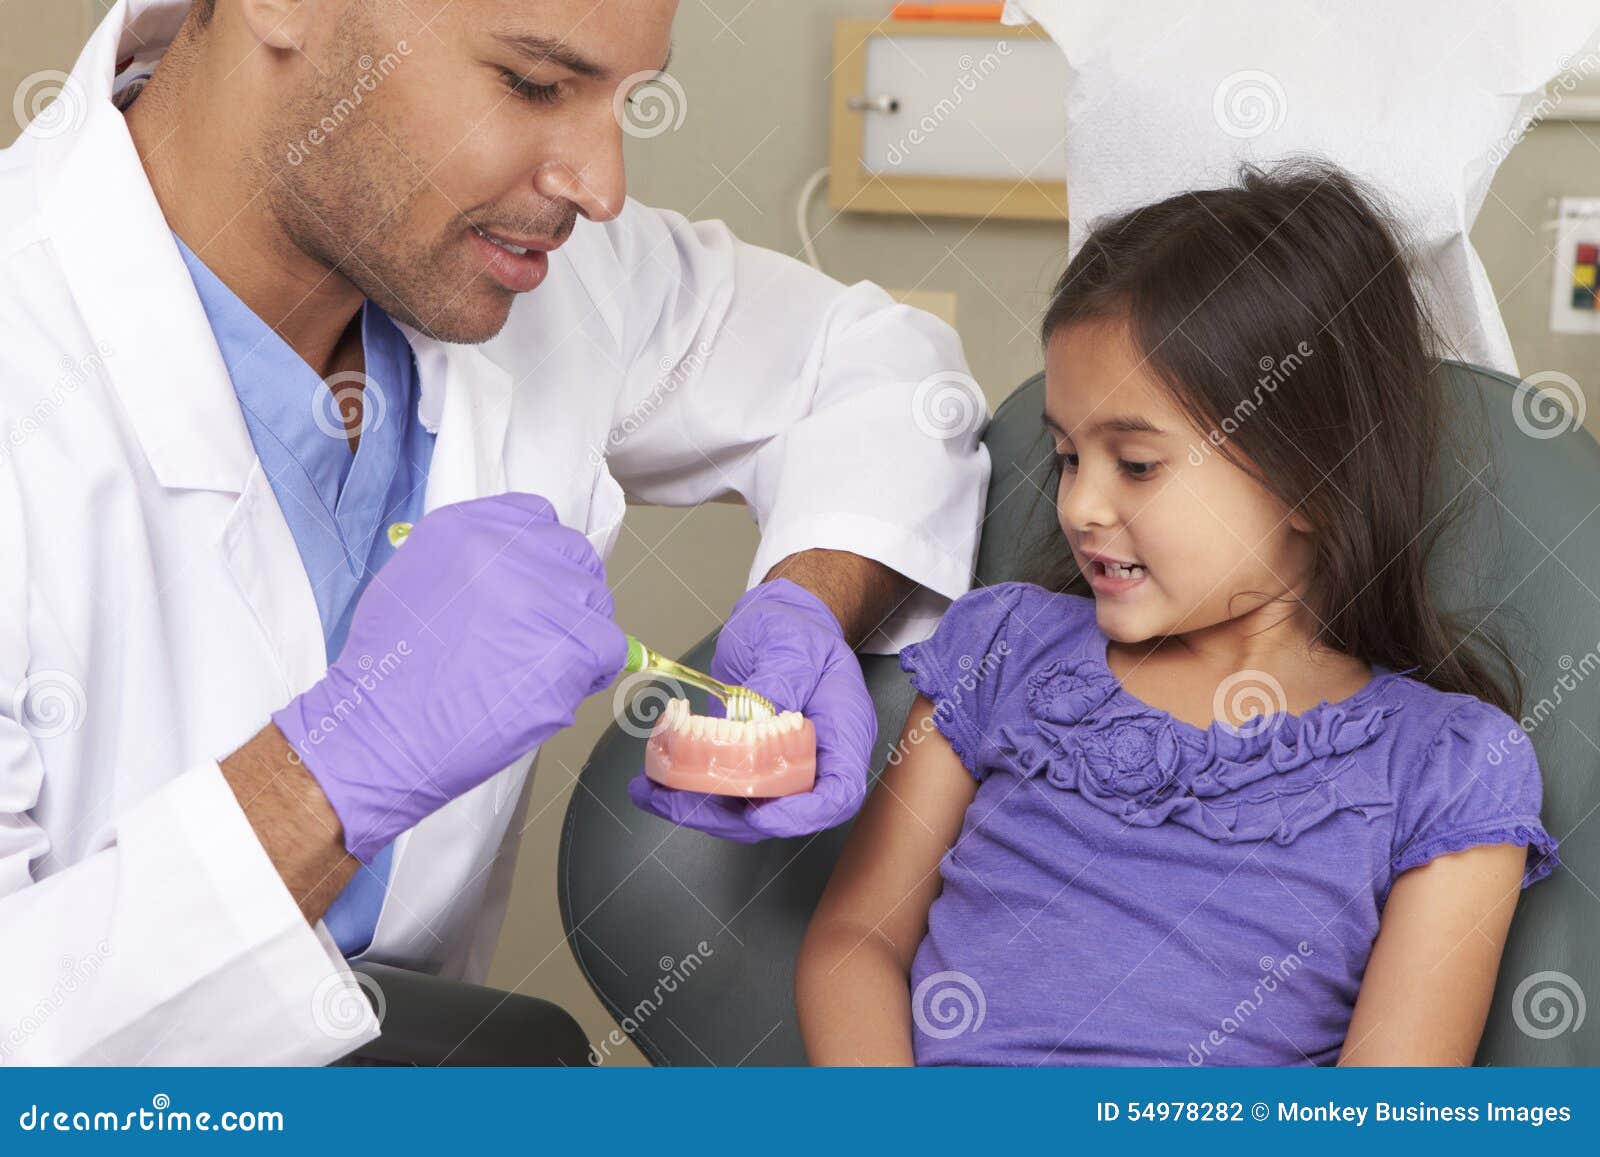 dentist demonstrating how to brush teeth to young female patient